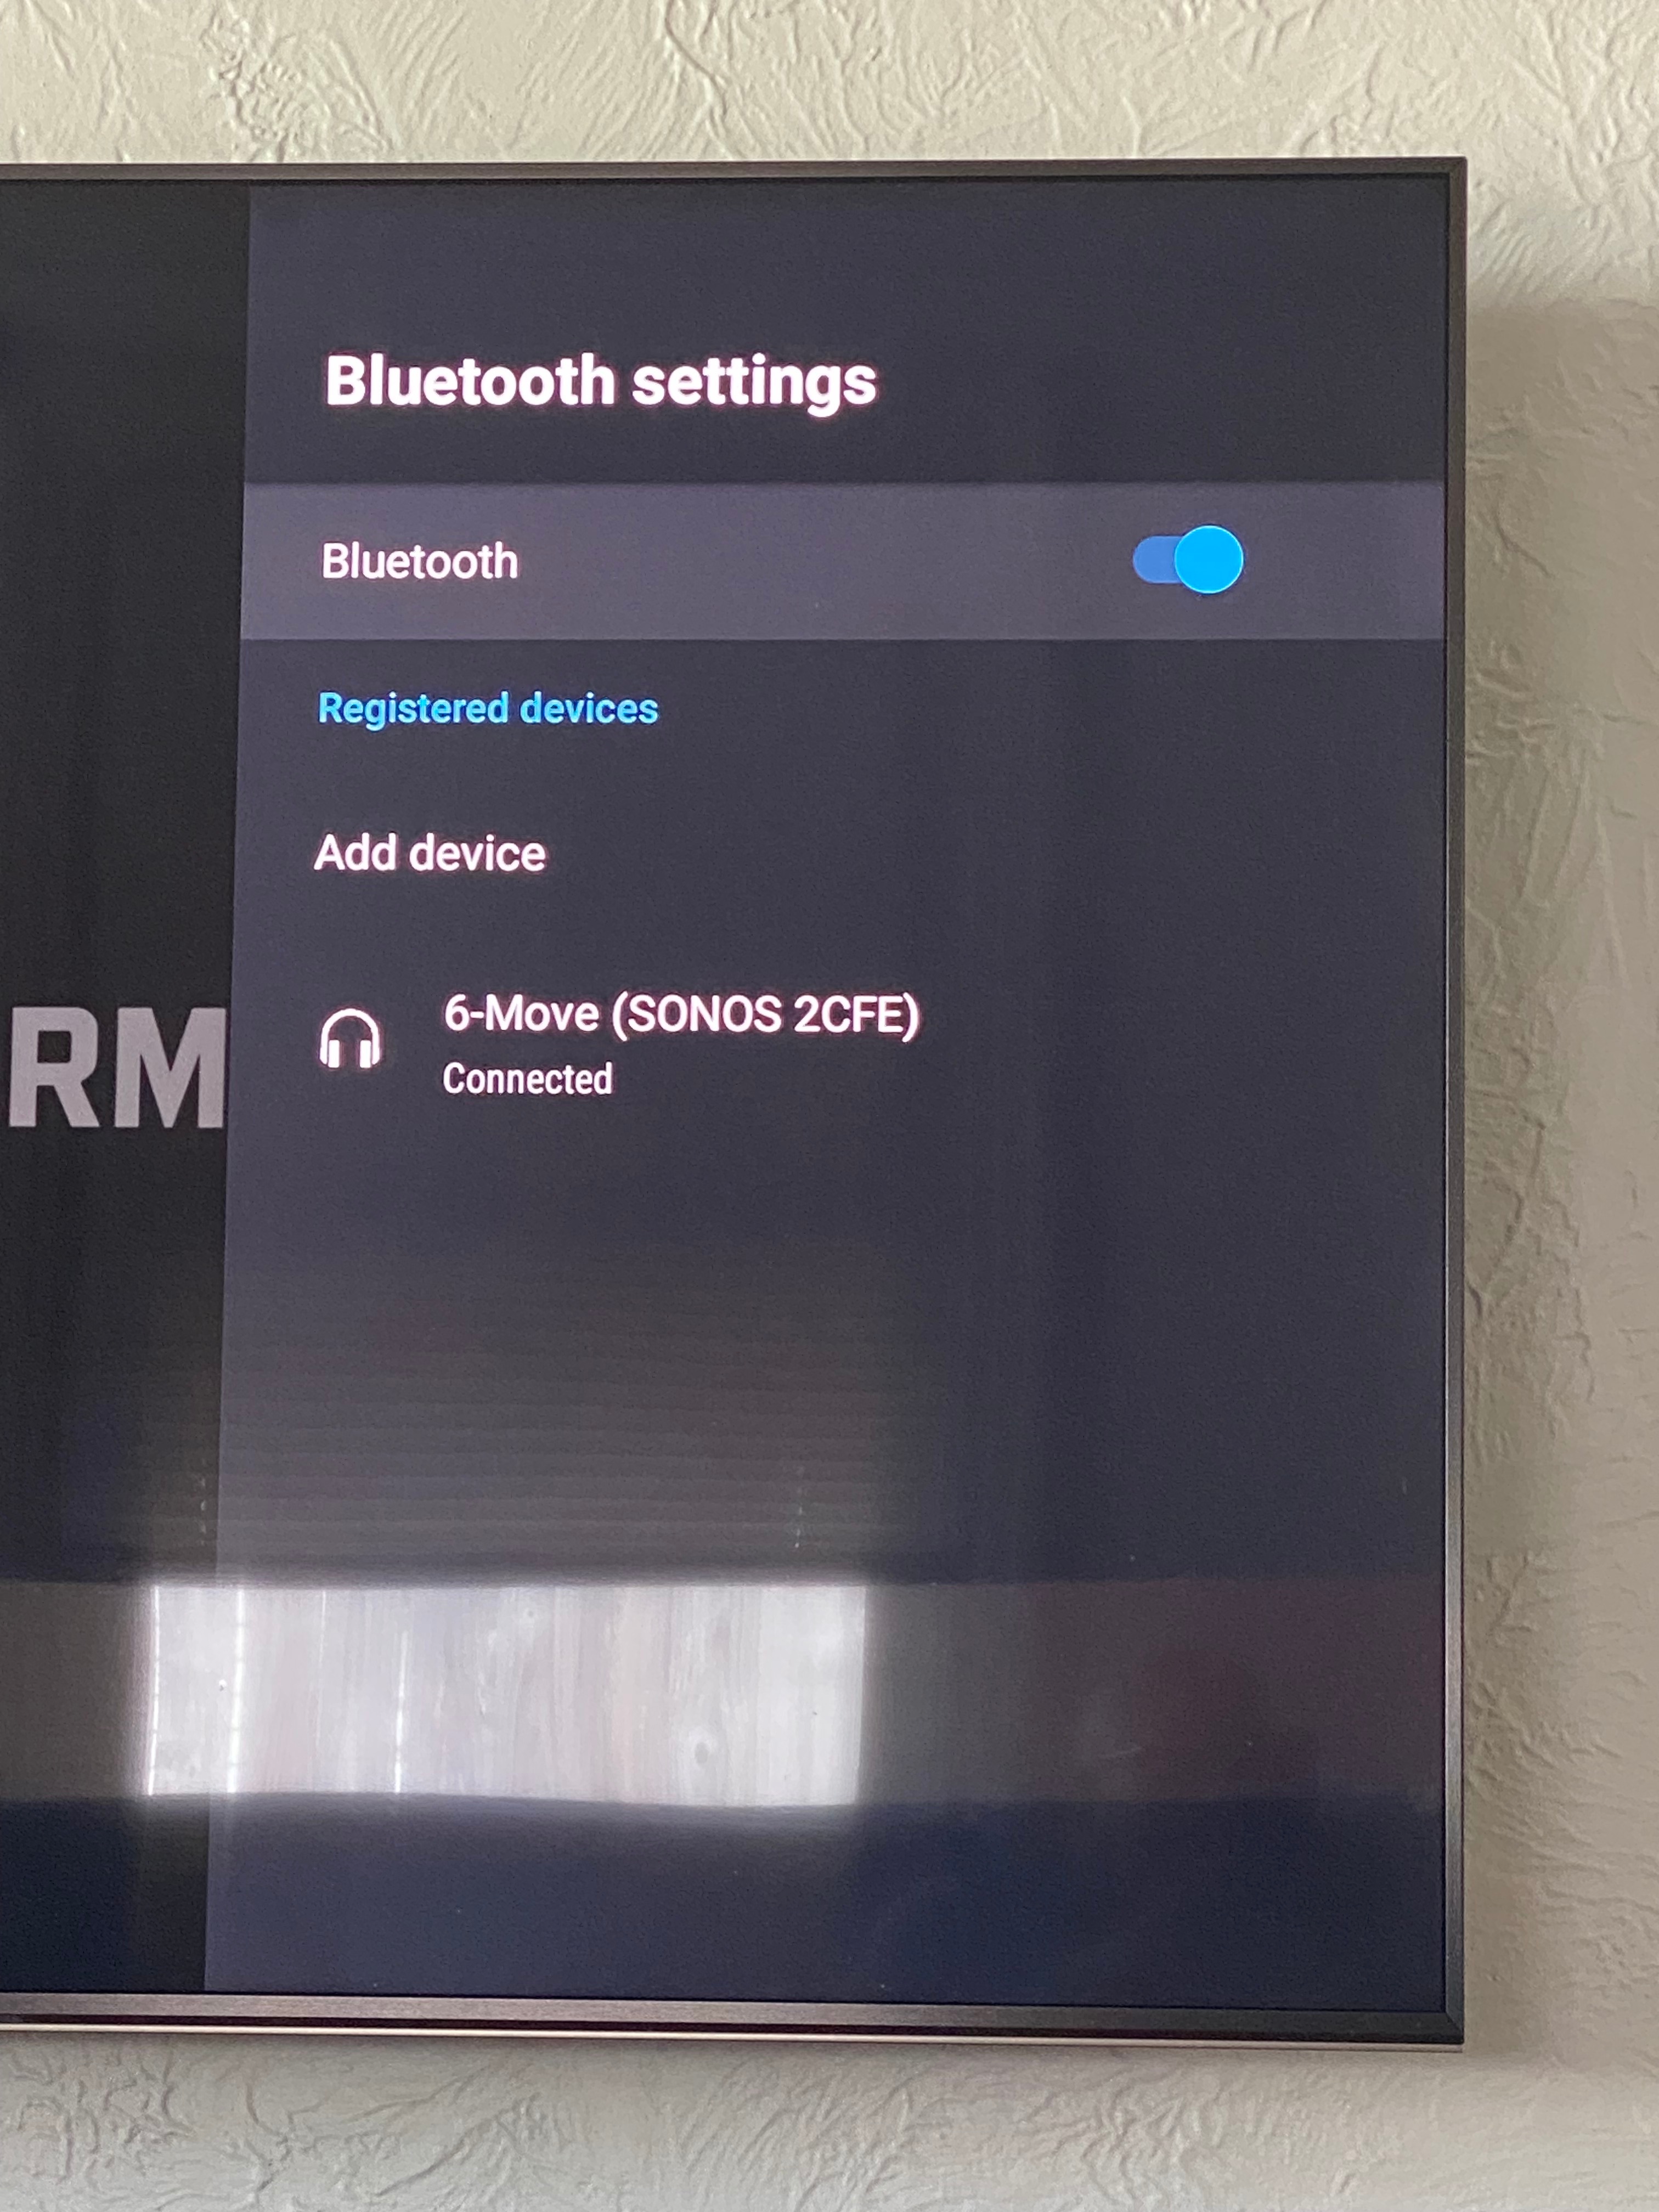 How To Add Bluetooth Sound On ANY TV Easily With A Bluetooth